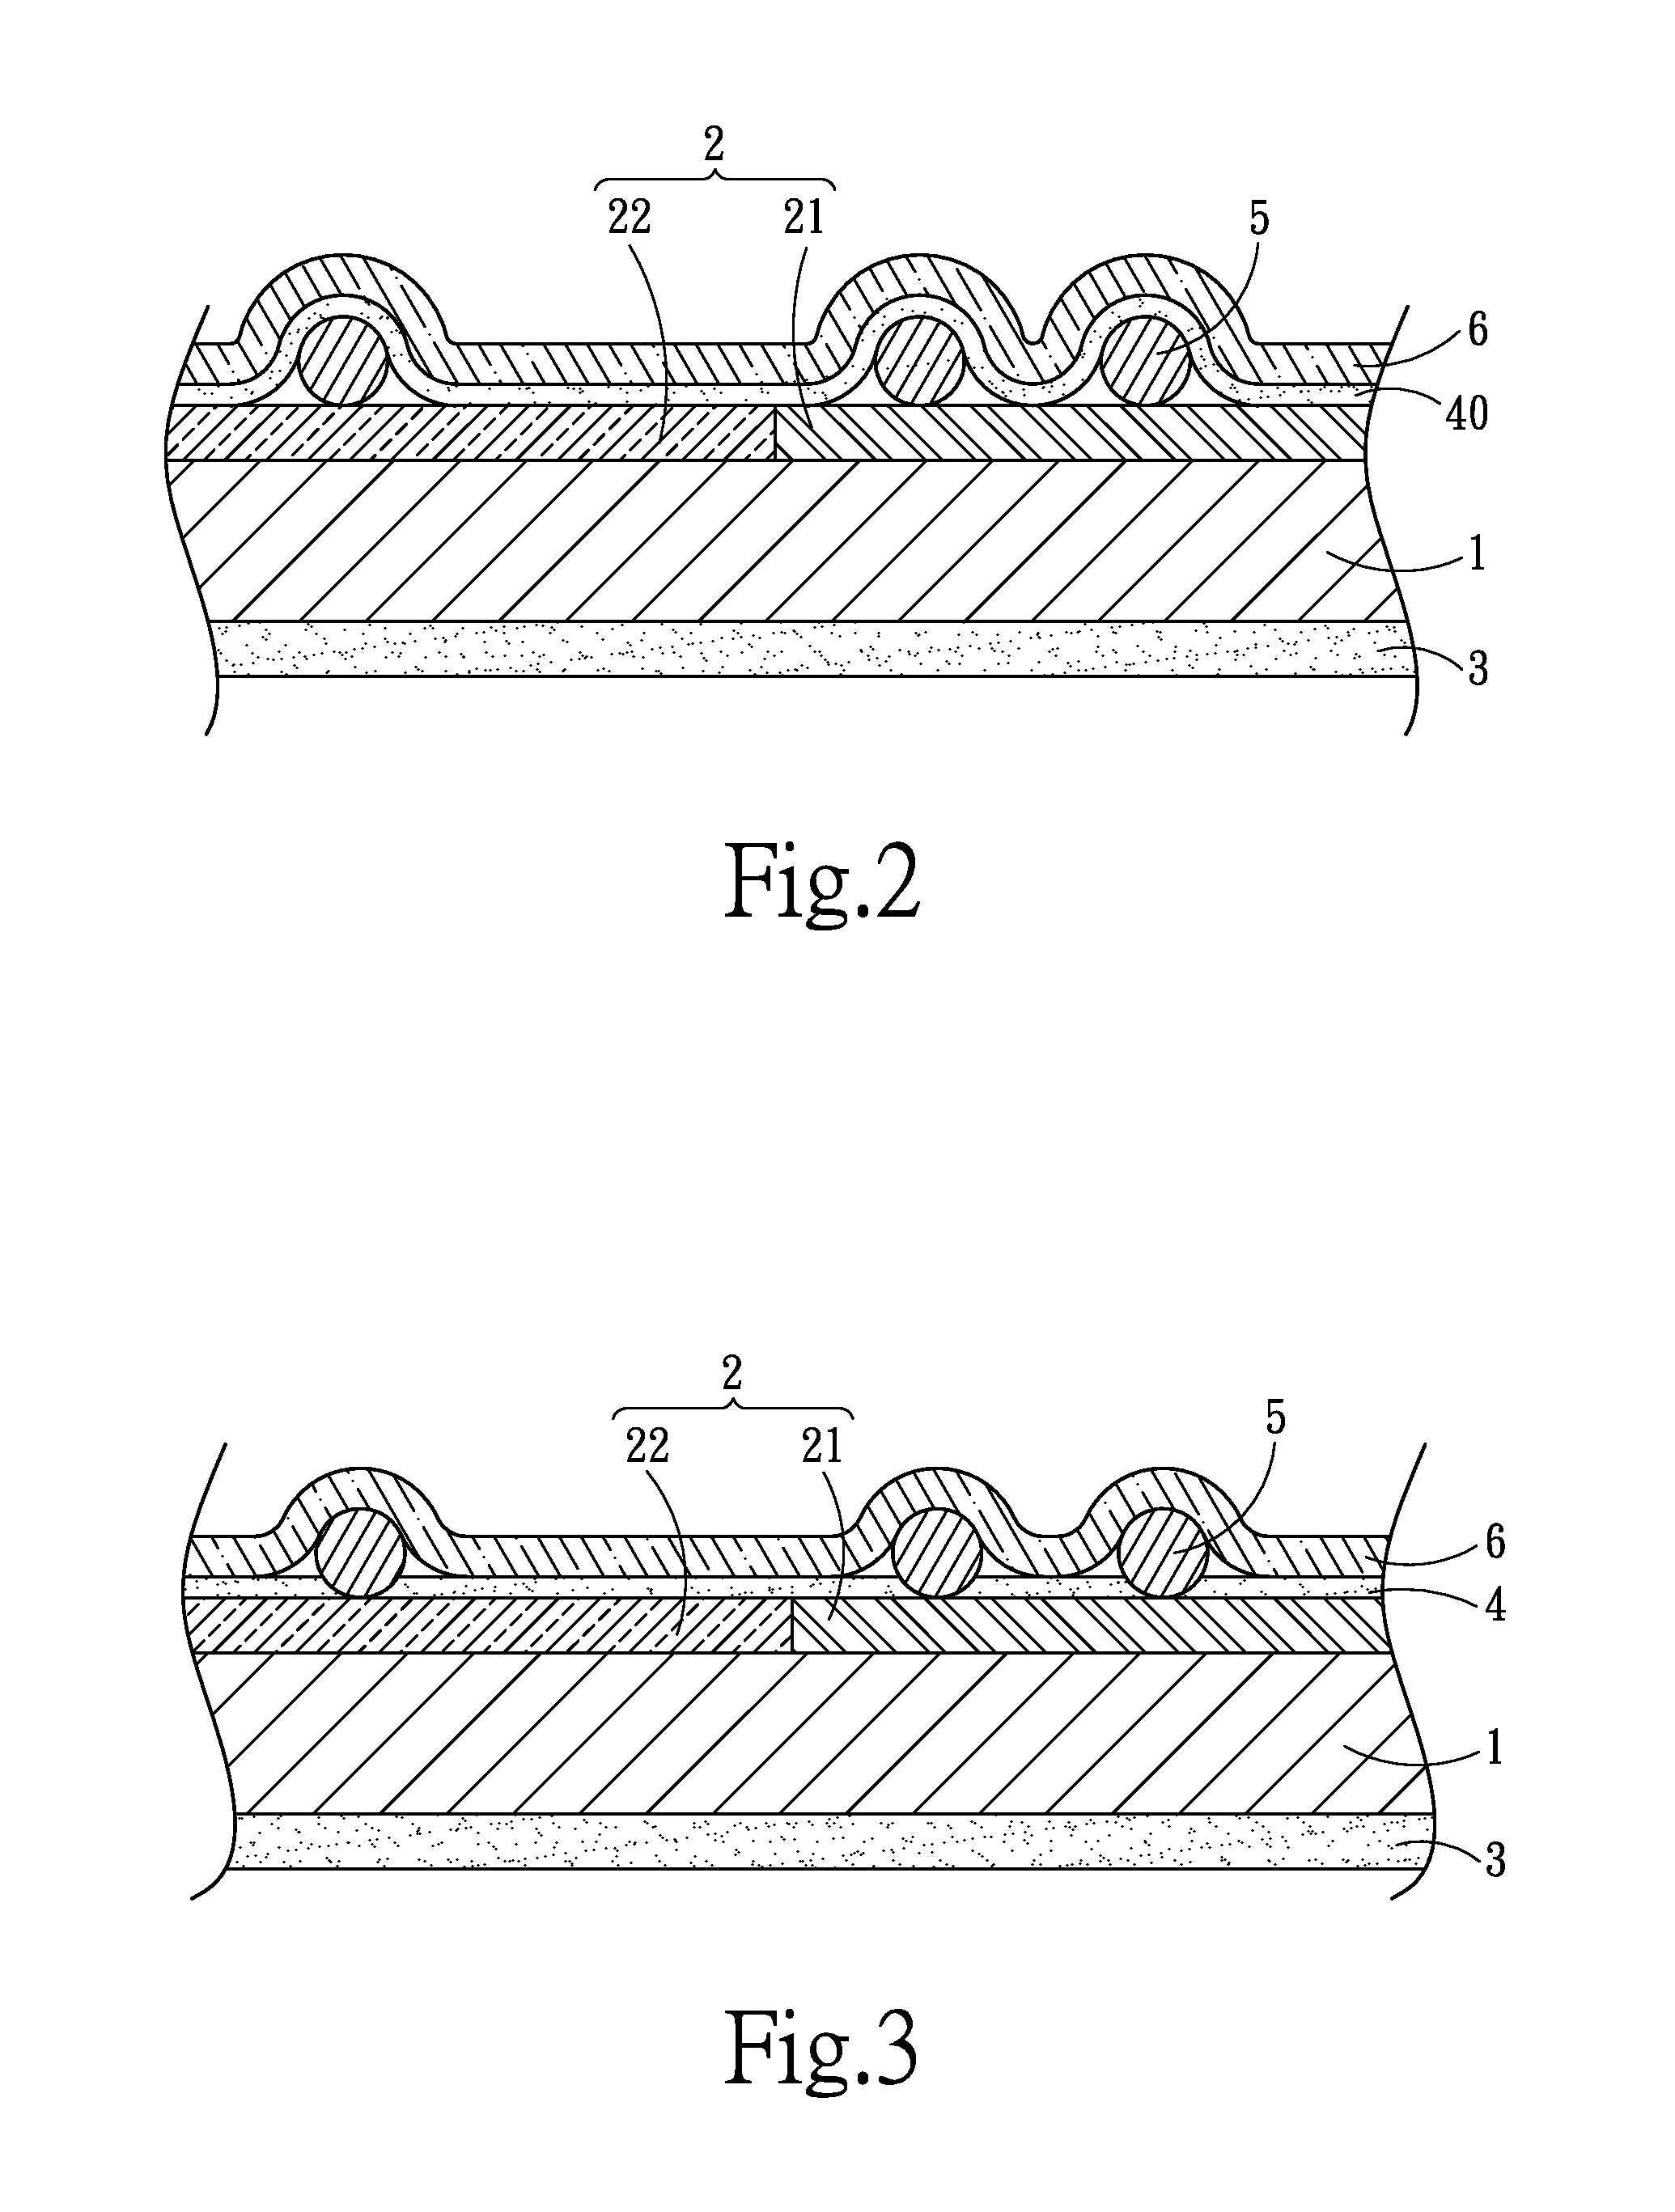 Anti-forgery label using random protruding elements and method for manufaturing the same